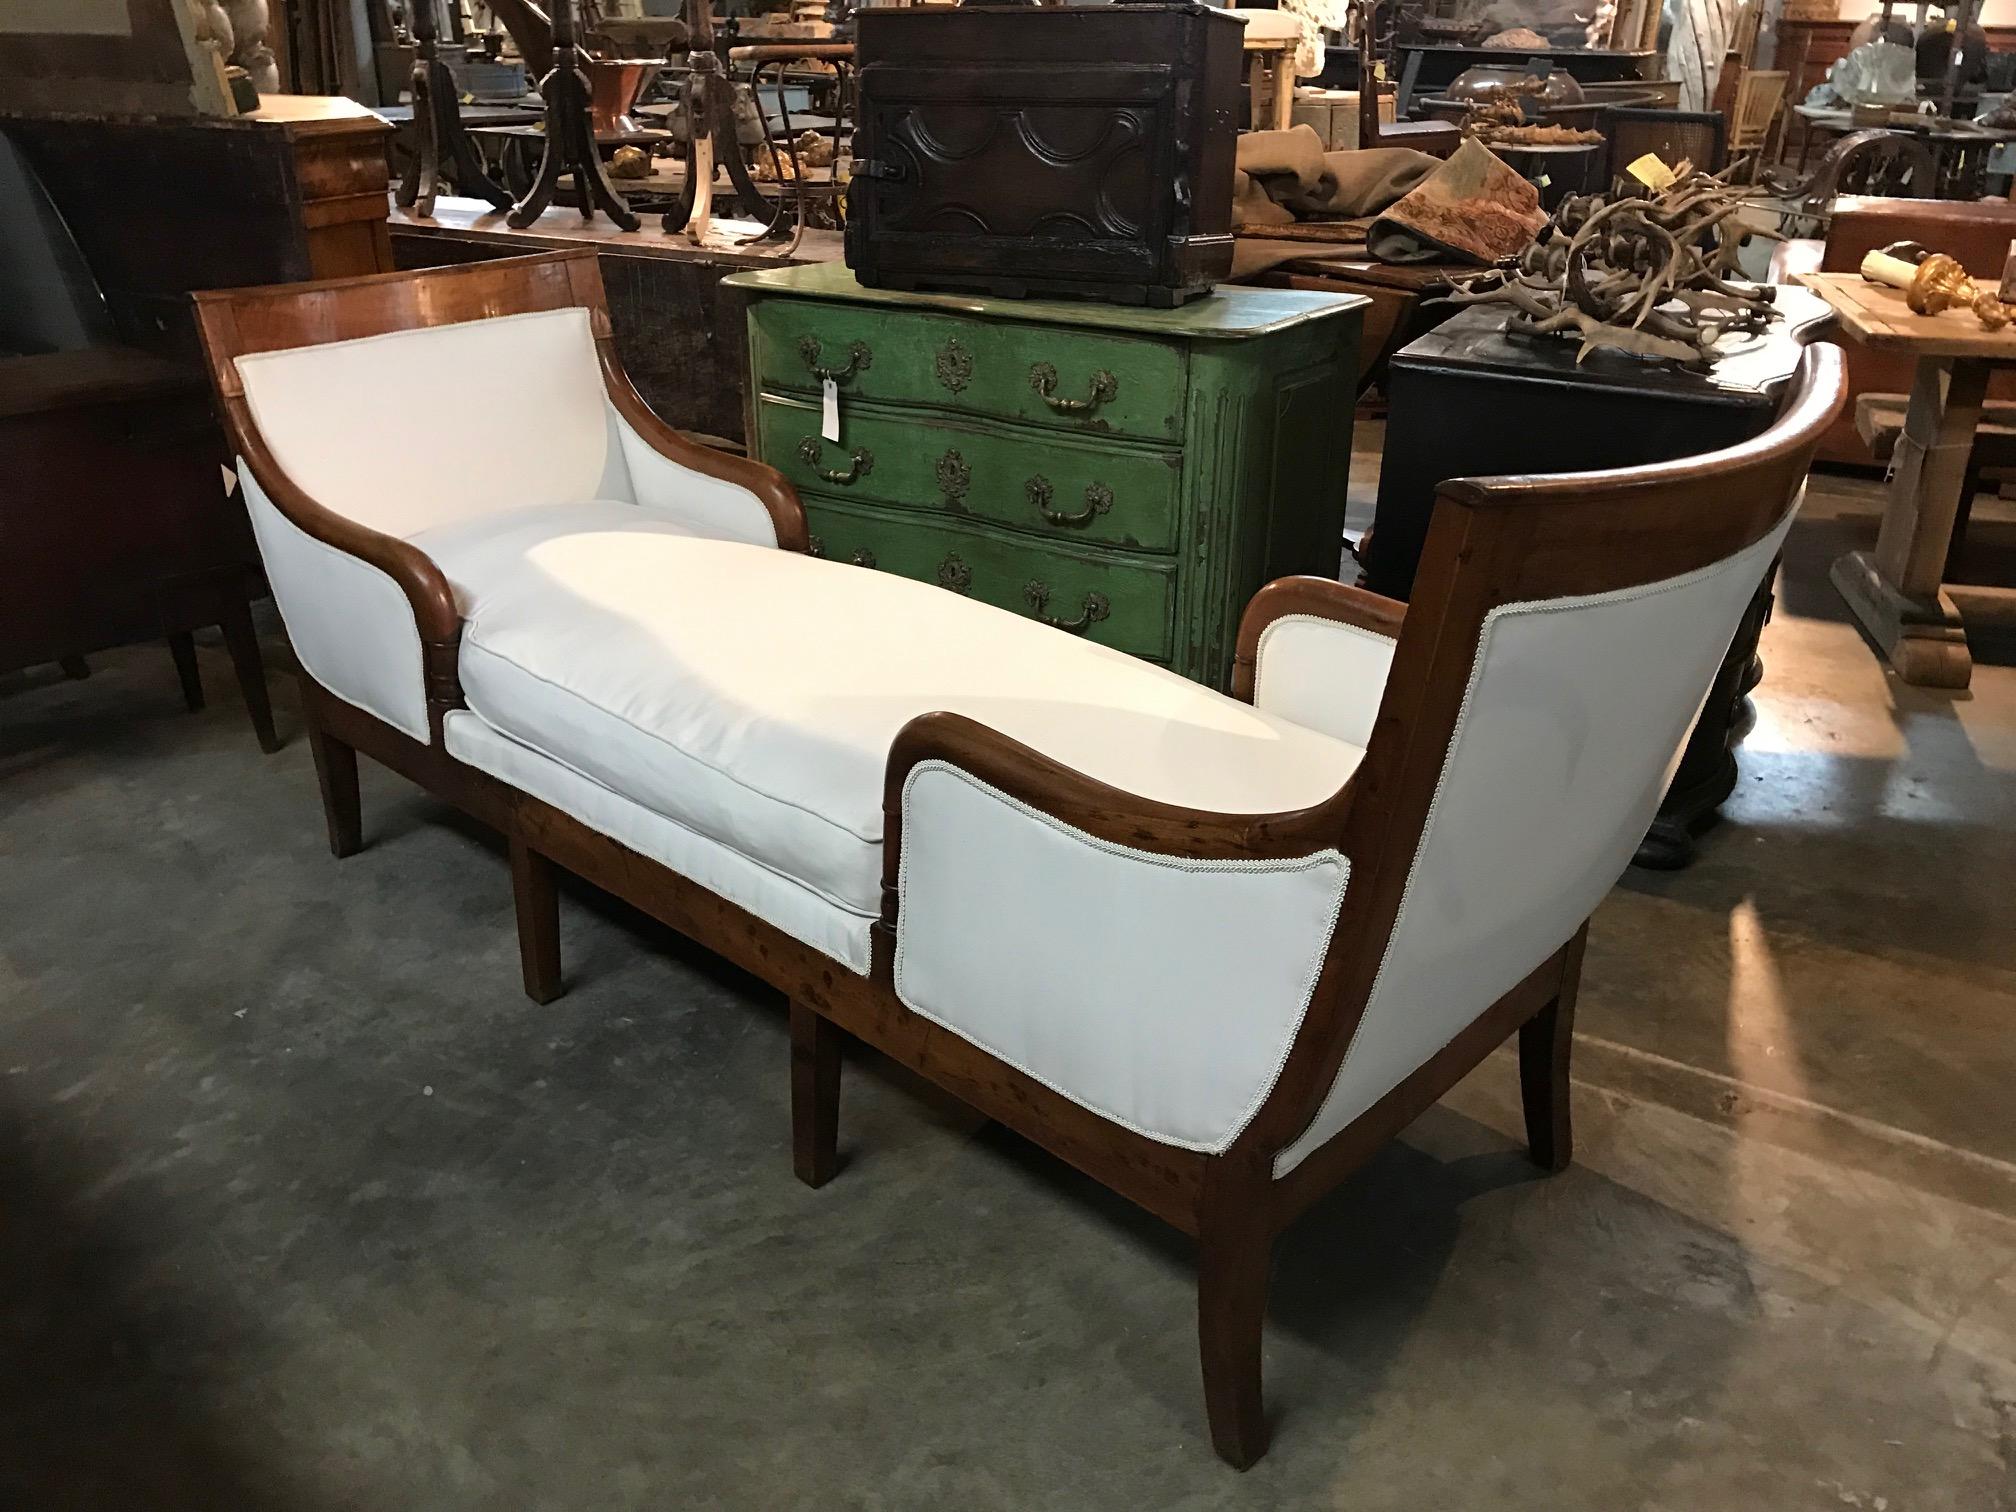 A very handsome early 19th century French Directoire period chaise longue or daybed in walnut. The walnut has a wonderful patina and striking grain pattern. The graceful lines of this piece will make it an elegant addition to any surrounding.